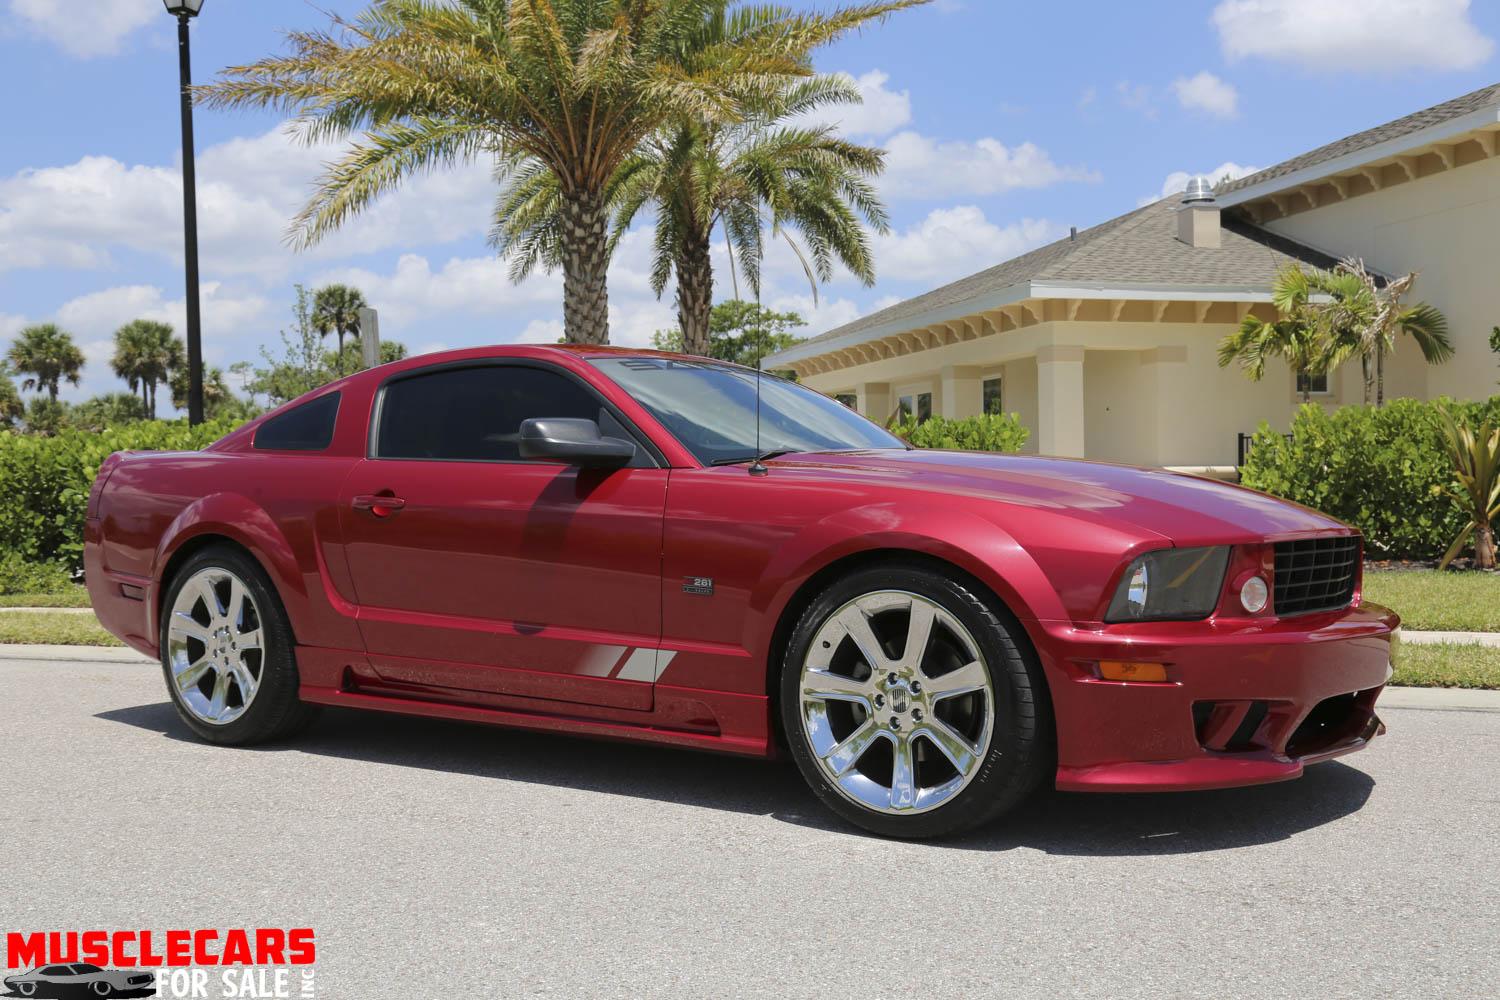 Used 2005 Ford Mustang Saleen Saleen for sale Sold at Muscle Cars for Sale Inc. in Fort Myers FL 33912 2